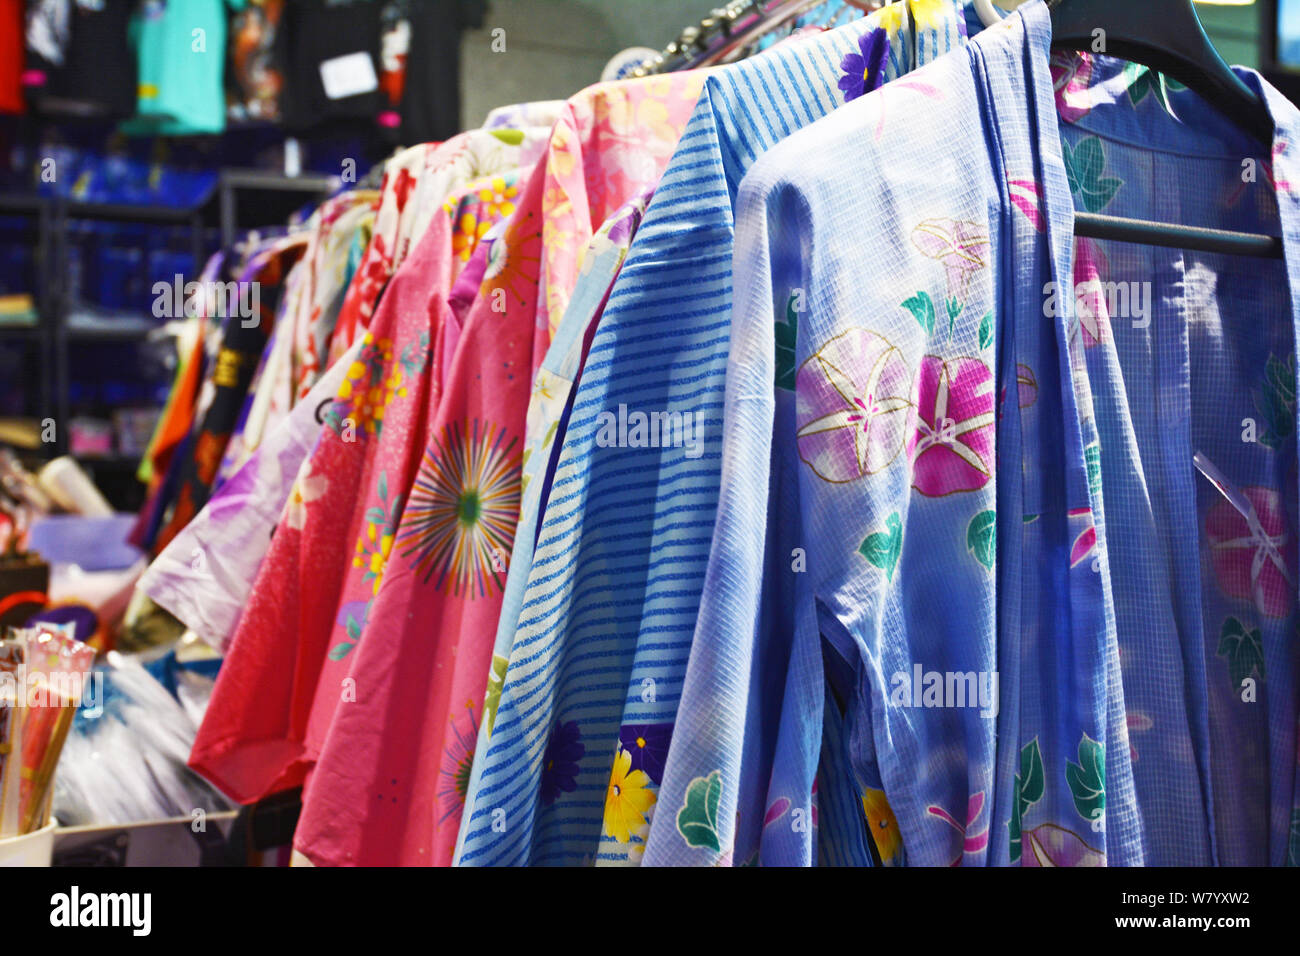 Traditional Japanese female summer garments called 'Yukata' with floral patterns on a rack Stock Photo